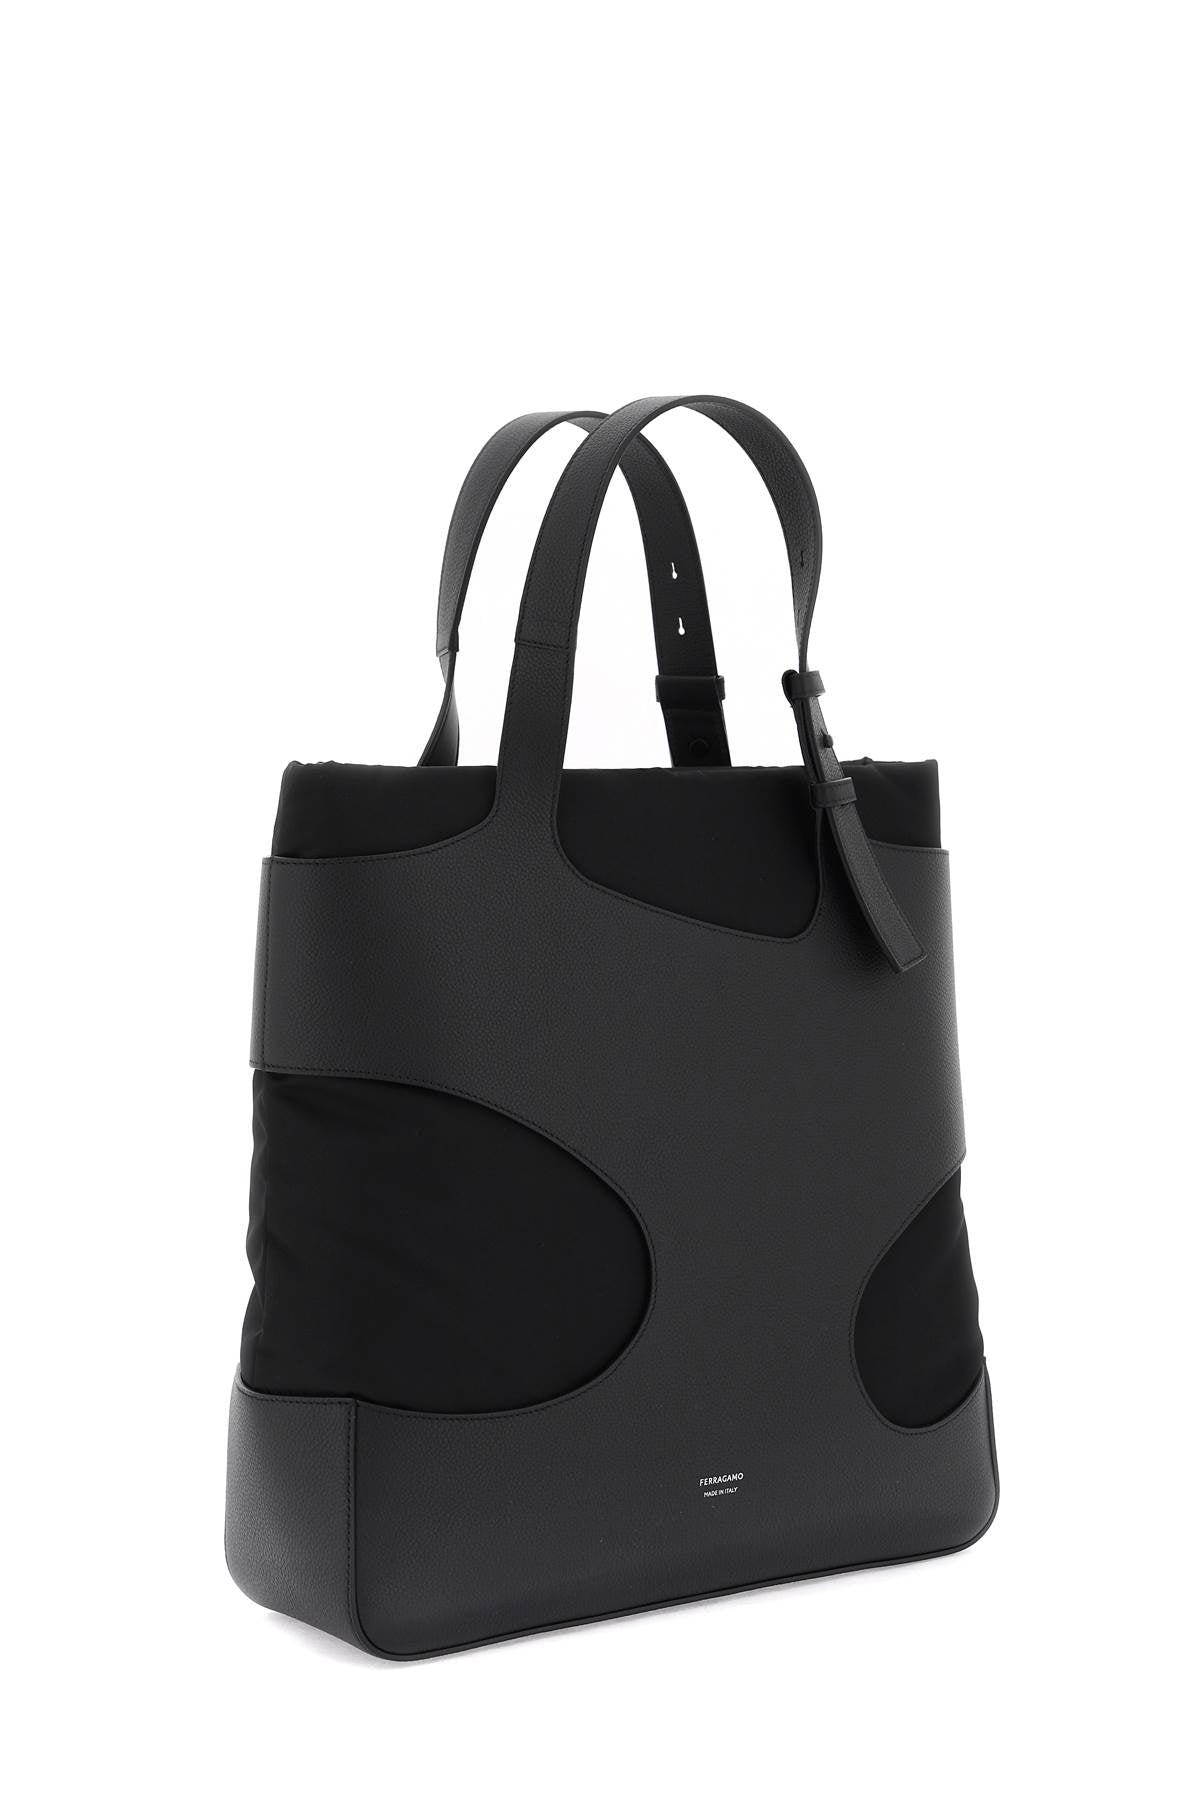 Men's Black Padded Nylon Tote with Leather Cut-Outs